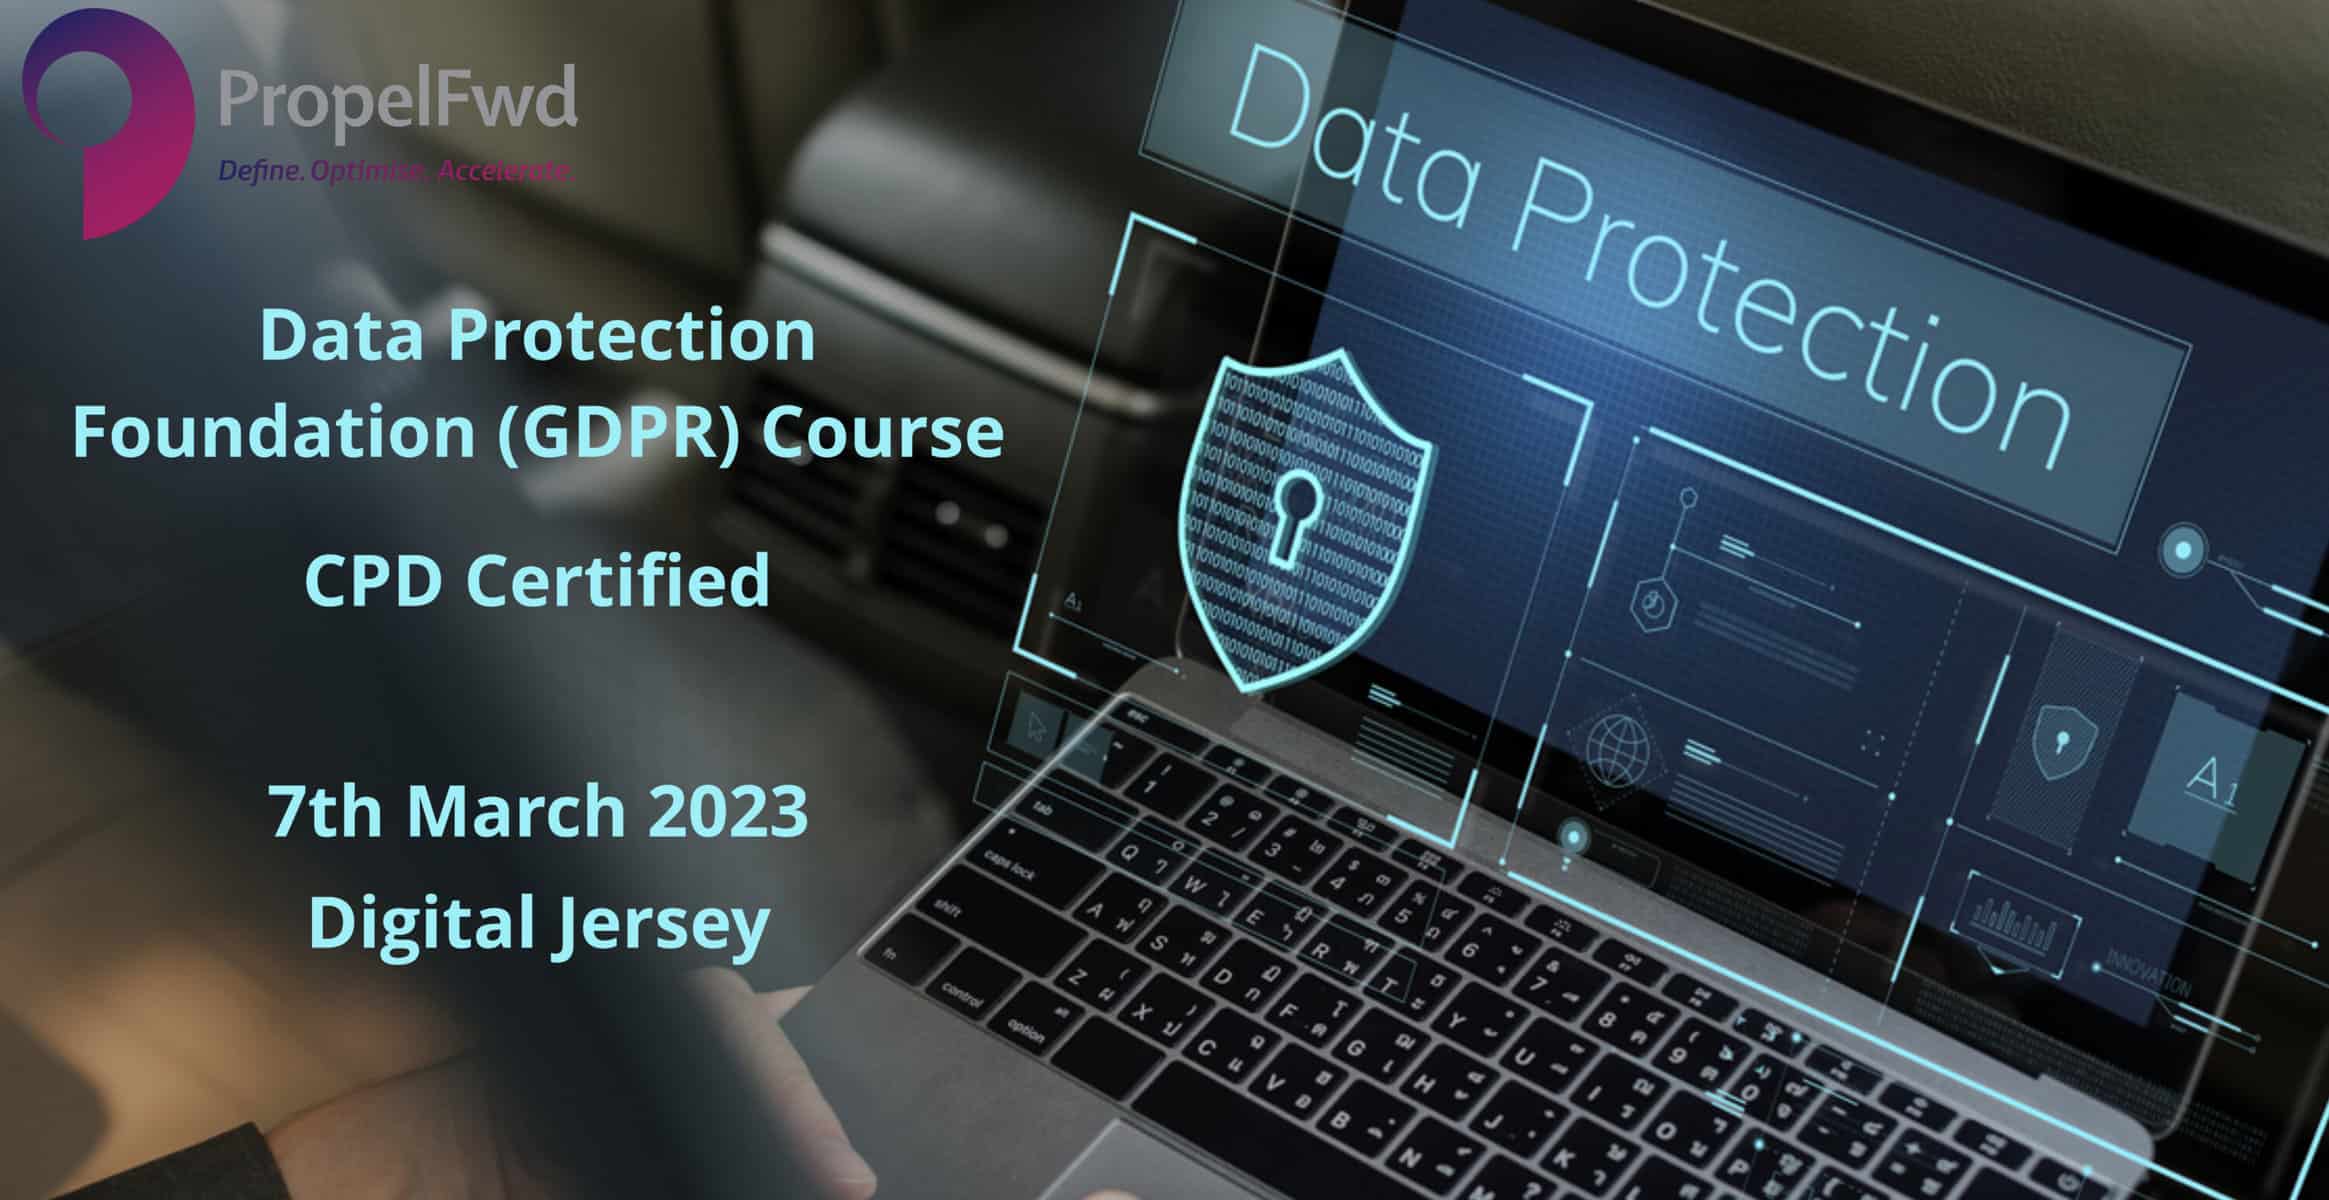 Data Protection Foundation Course – CPD Certified